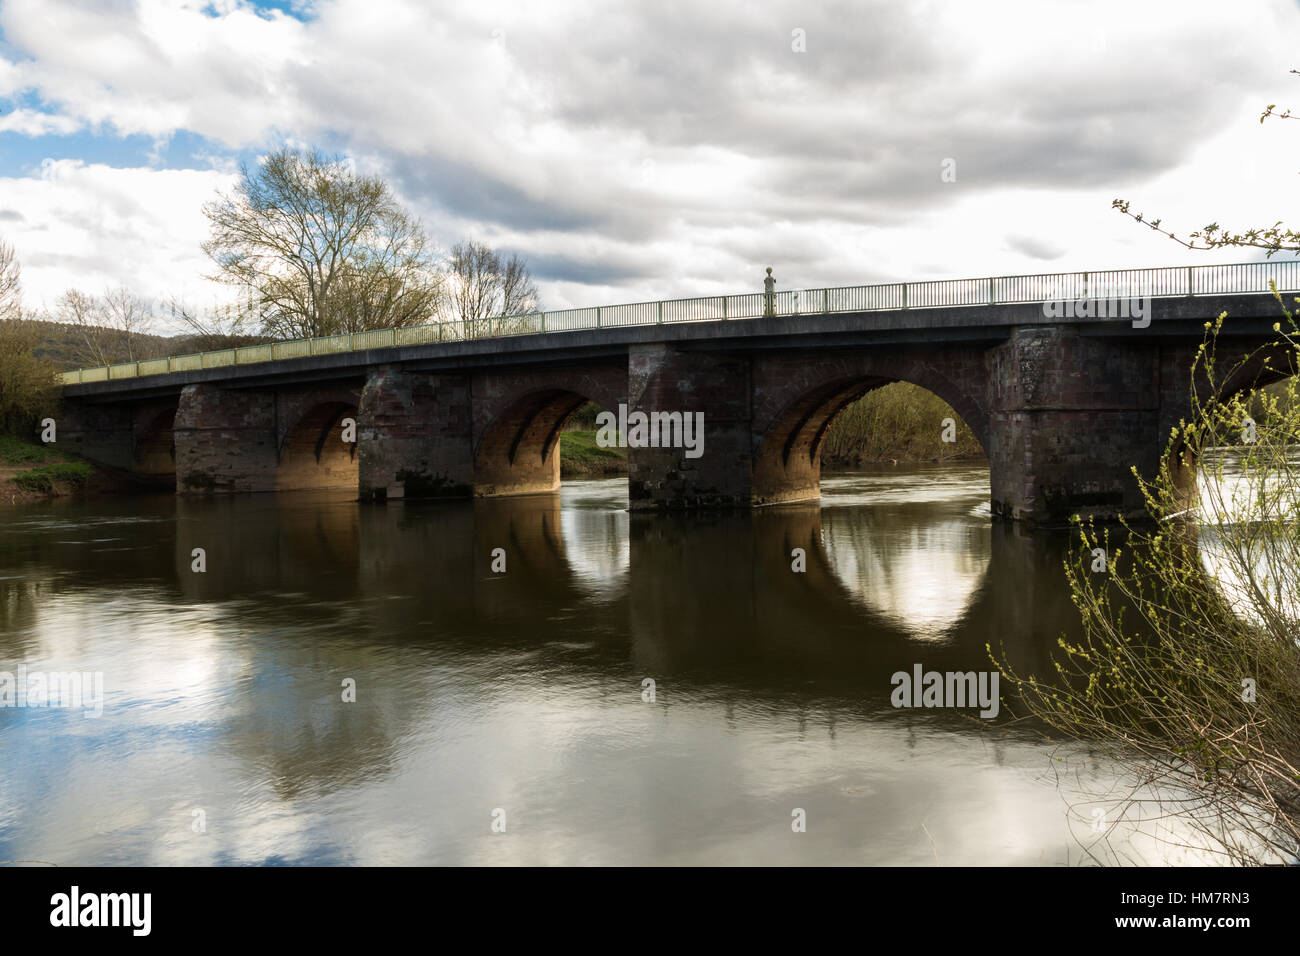 Wilton Bridge, a Grade I listed bridge over the River Wye from Wilton, Herefordshire and Ross-on-Wye, Herefordshire, England. Stock Photo